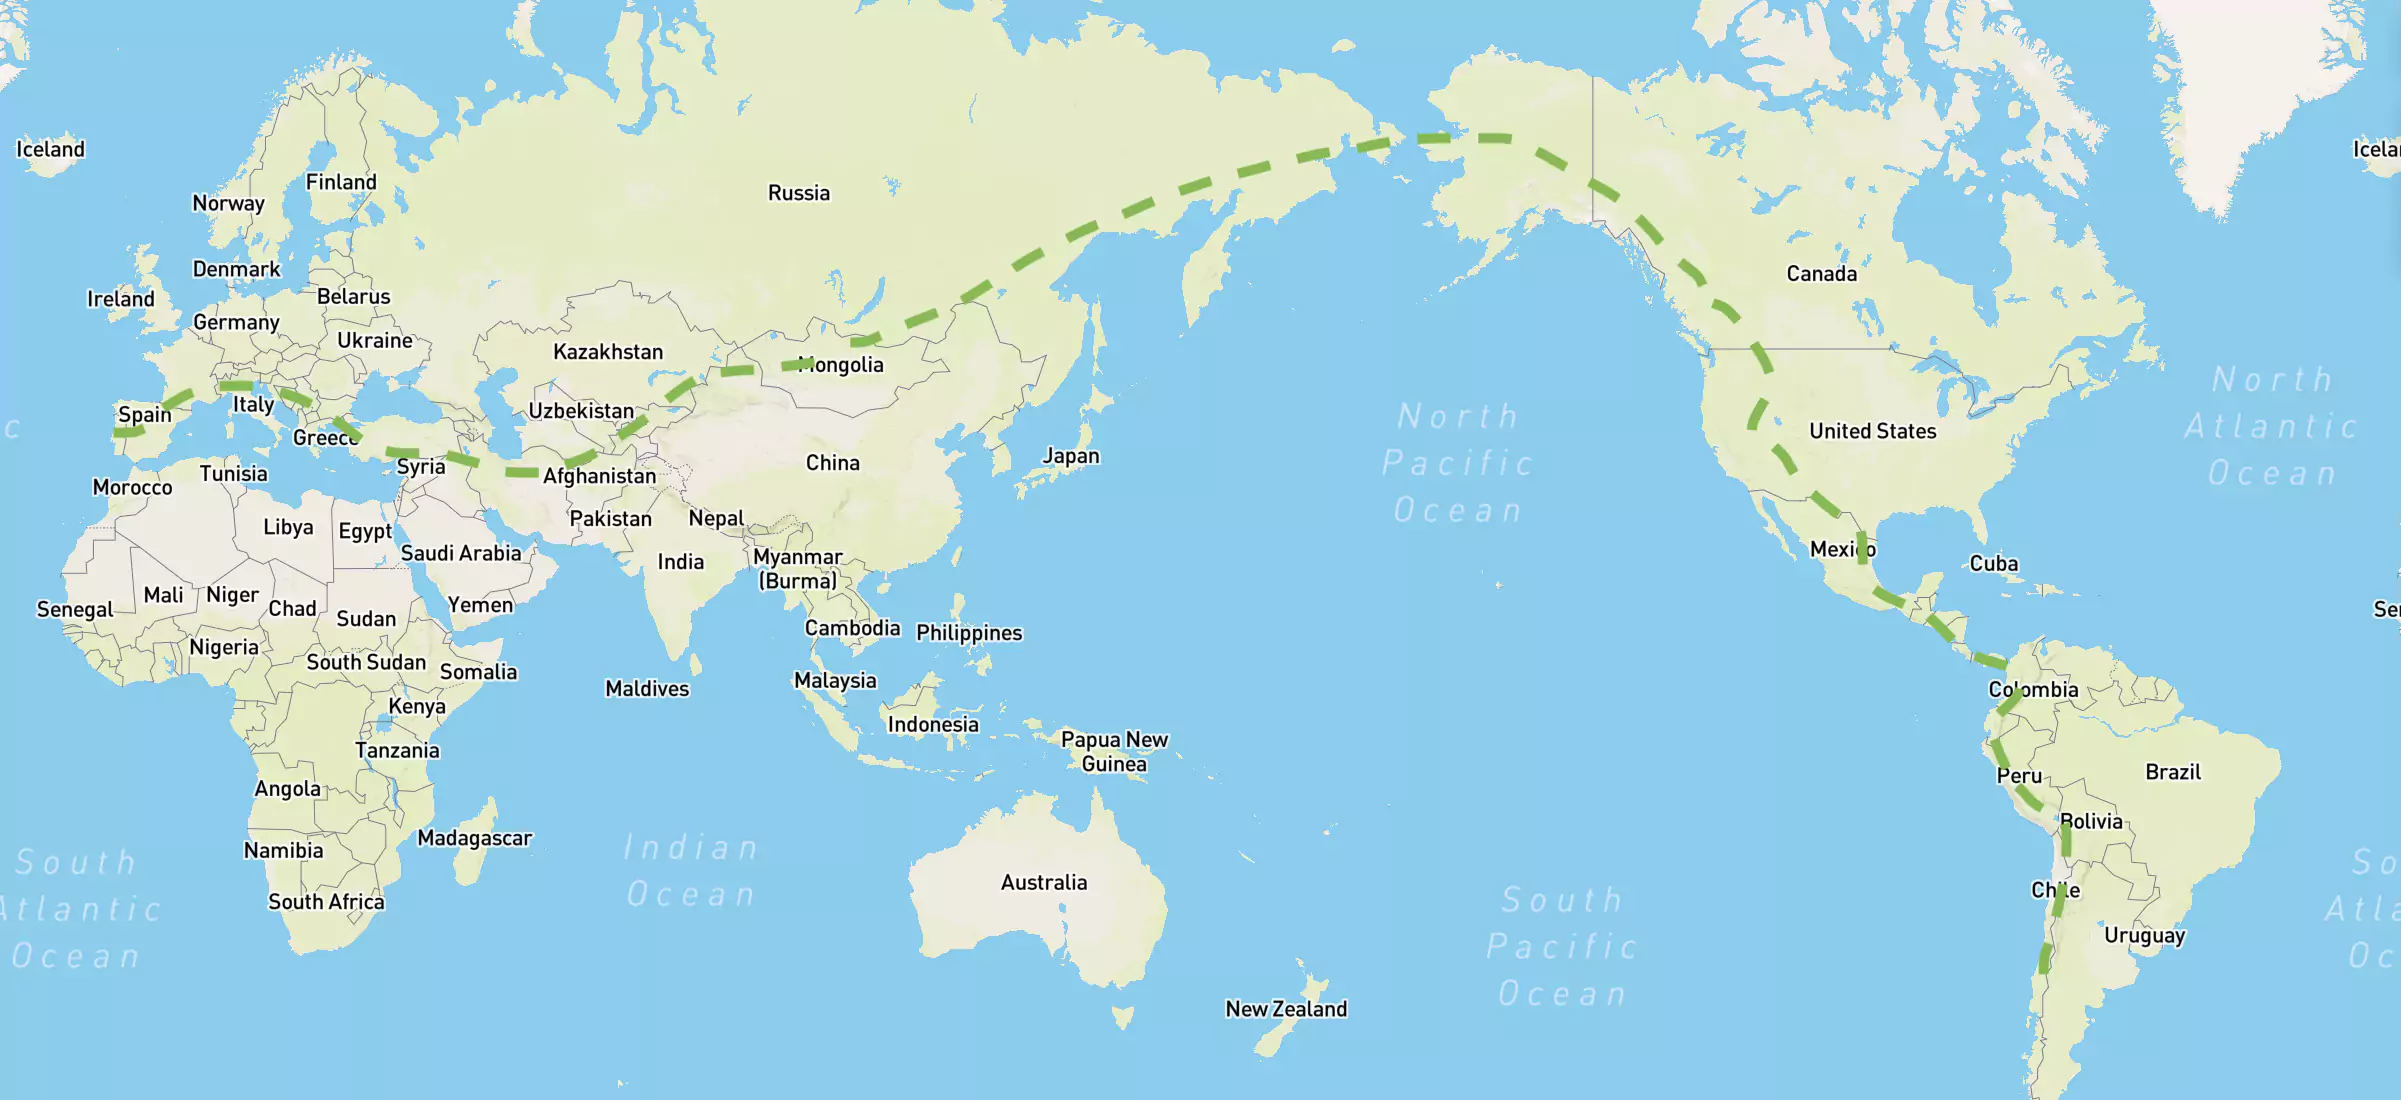 Longest Road Trips in the World You Could Drive  - Trans-Eurasian Belt